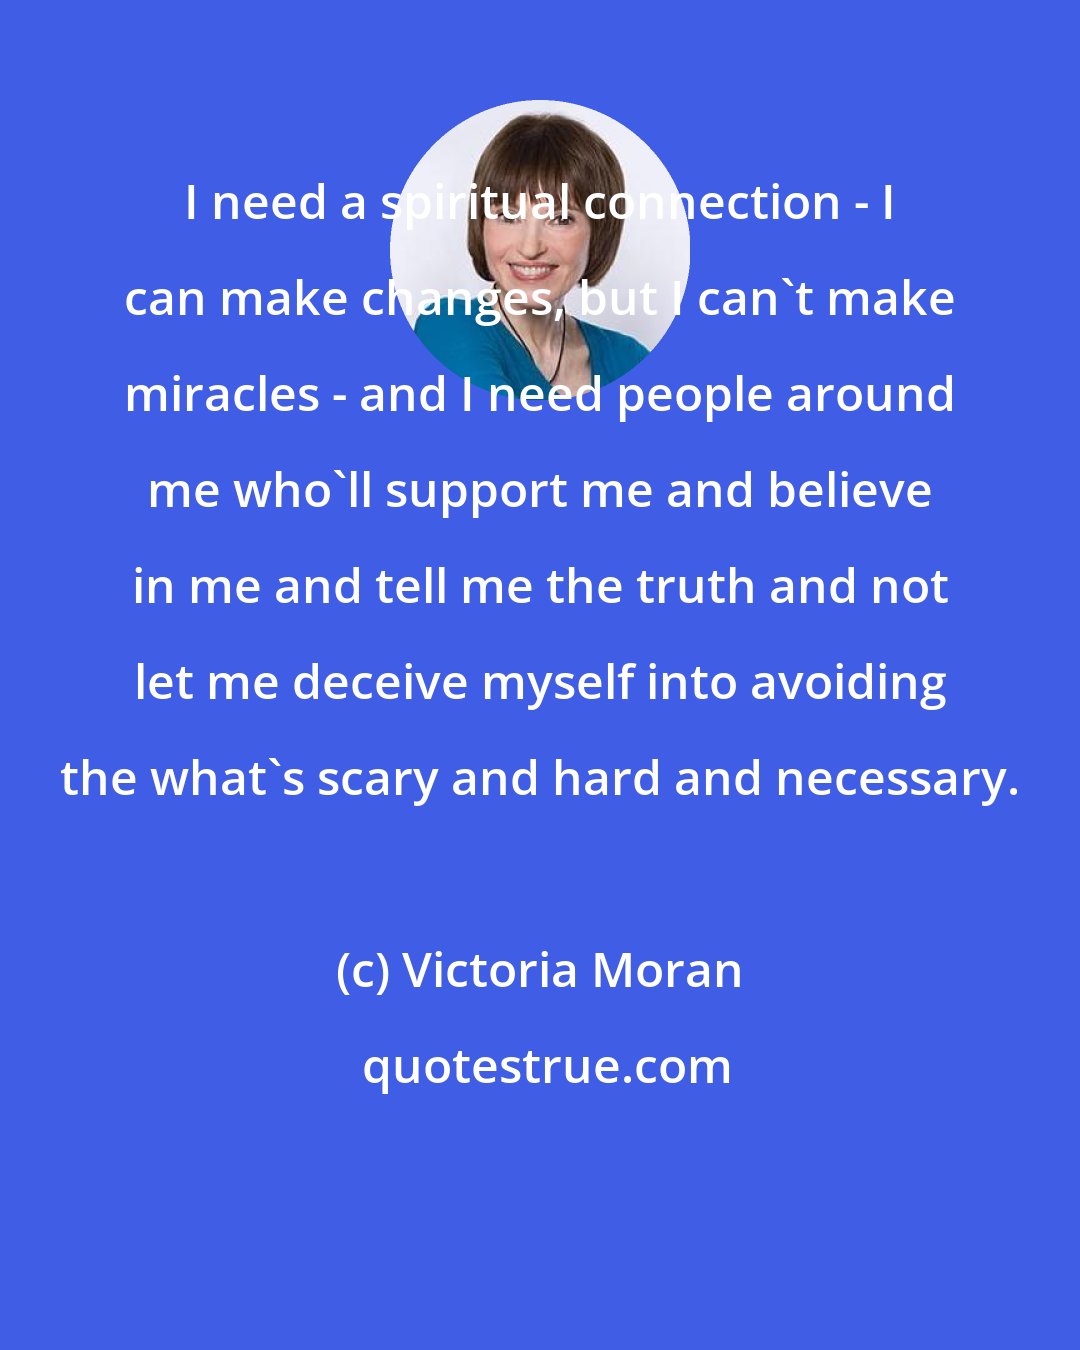 Victoria Moran: I need a spiritual connection - I can make changes, but I can't make miracles - and I need people around me who'll support me and believe in me and tell me the truth and not let me deceive myself into avoiding the what's scary and hard and necessary.